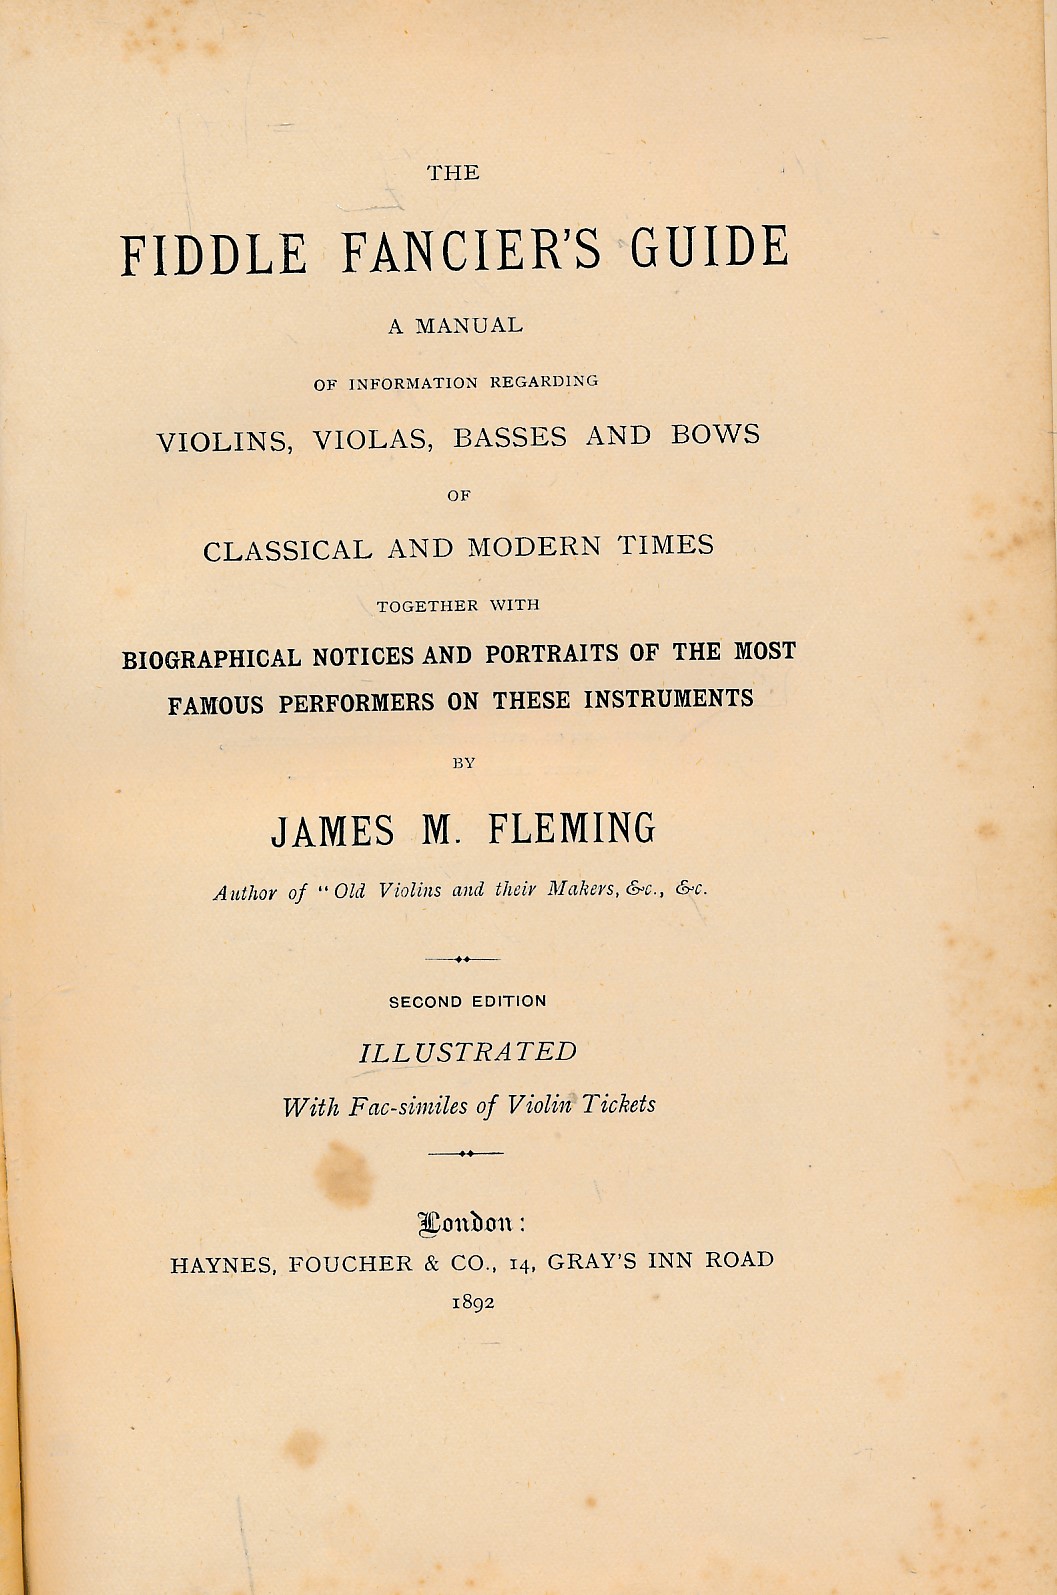 The Fiddle Fancier's Guide. A Manual of Information Regarding Violins, Violas, Basses and Bows of Classical and Modern Times....